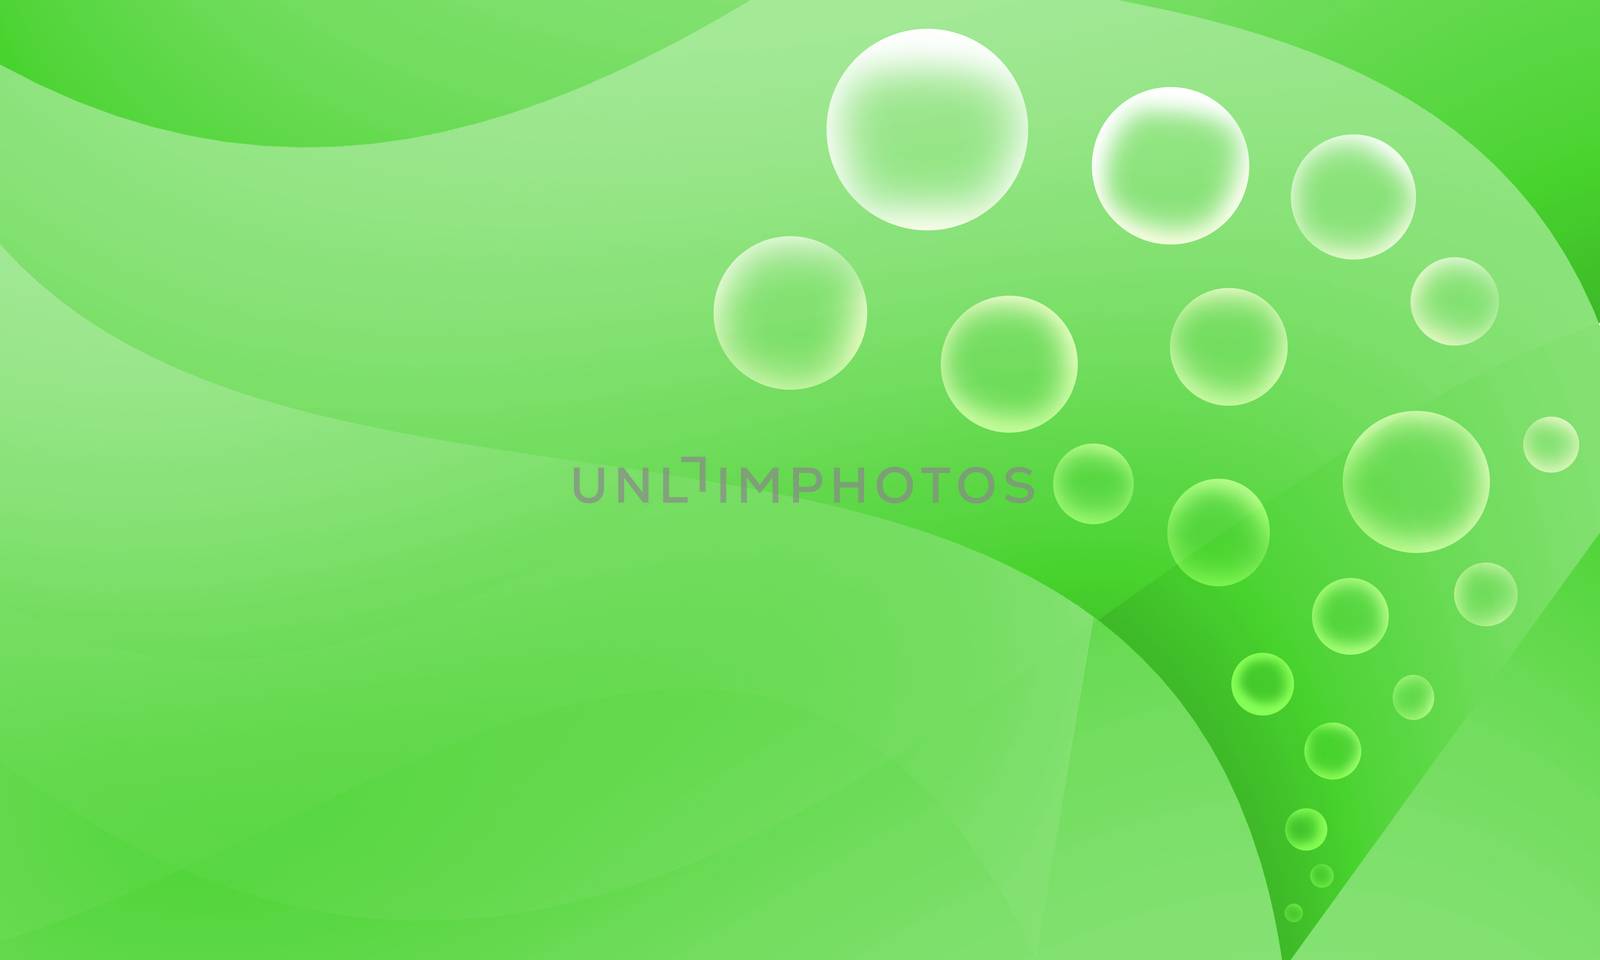 backgbackground abstract green colorround abstract green